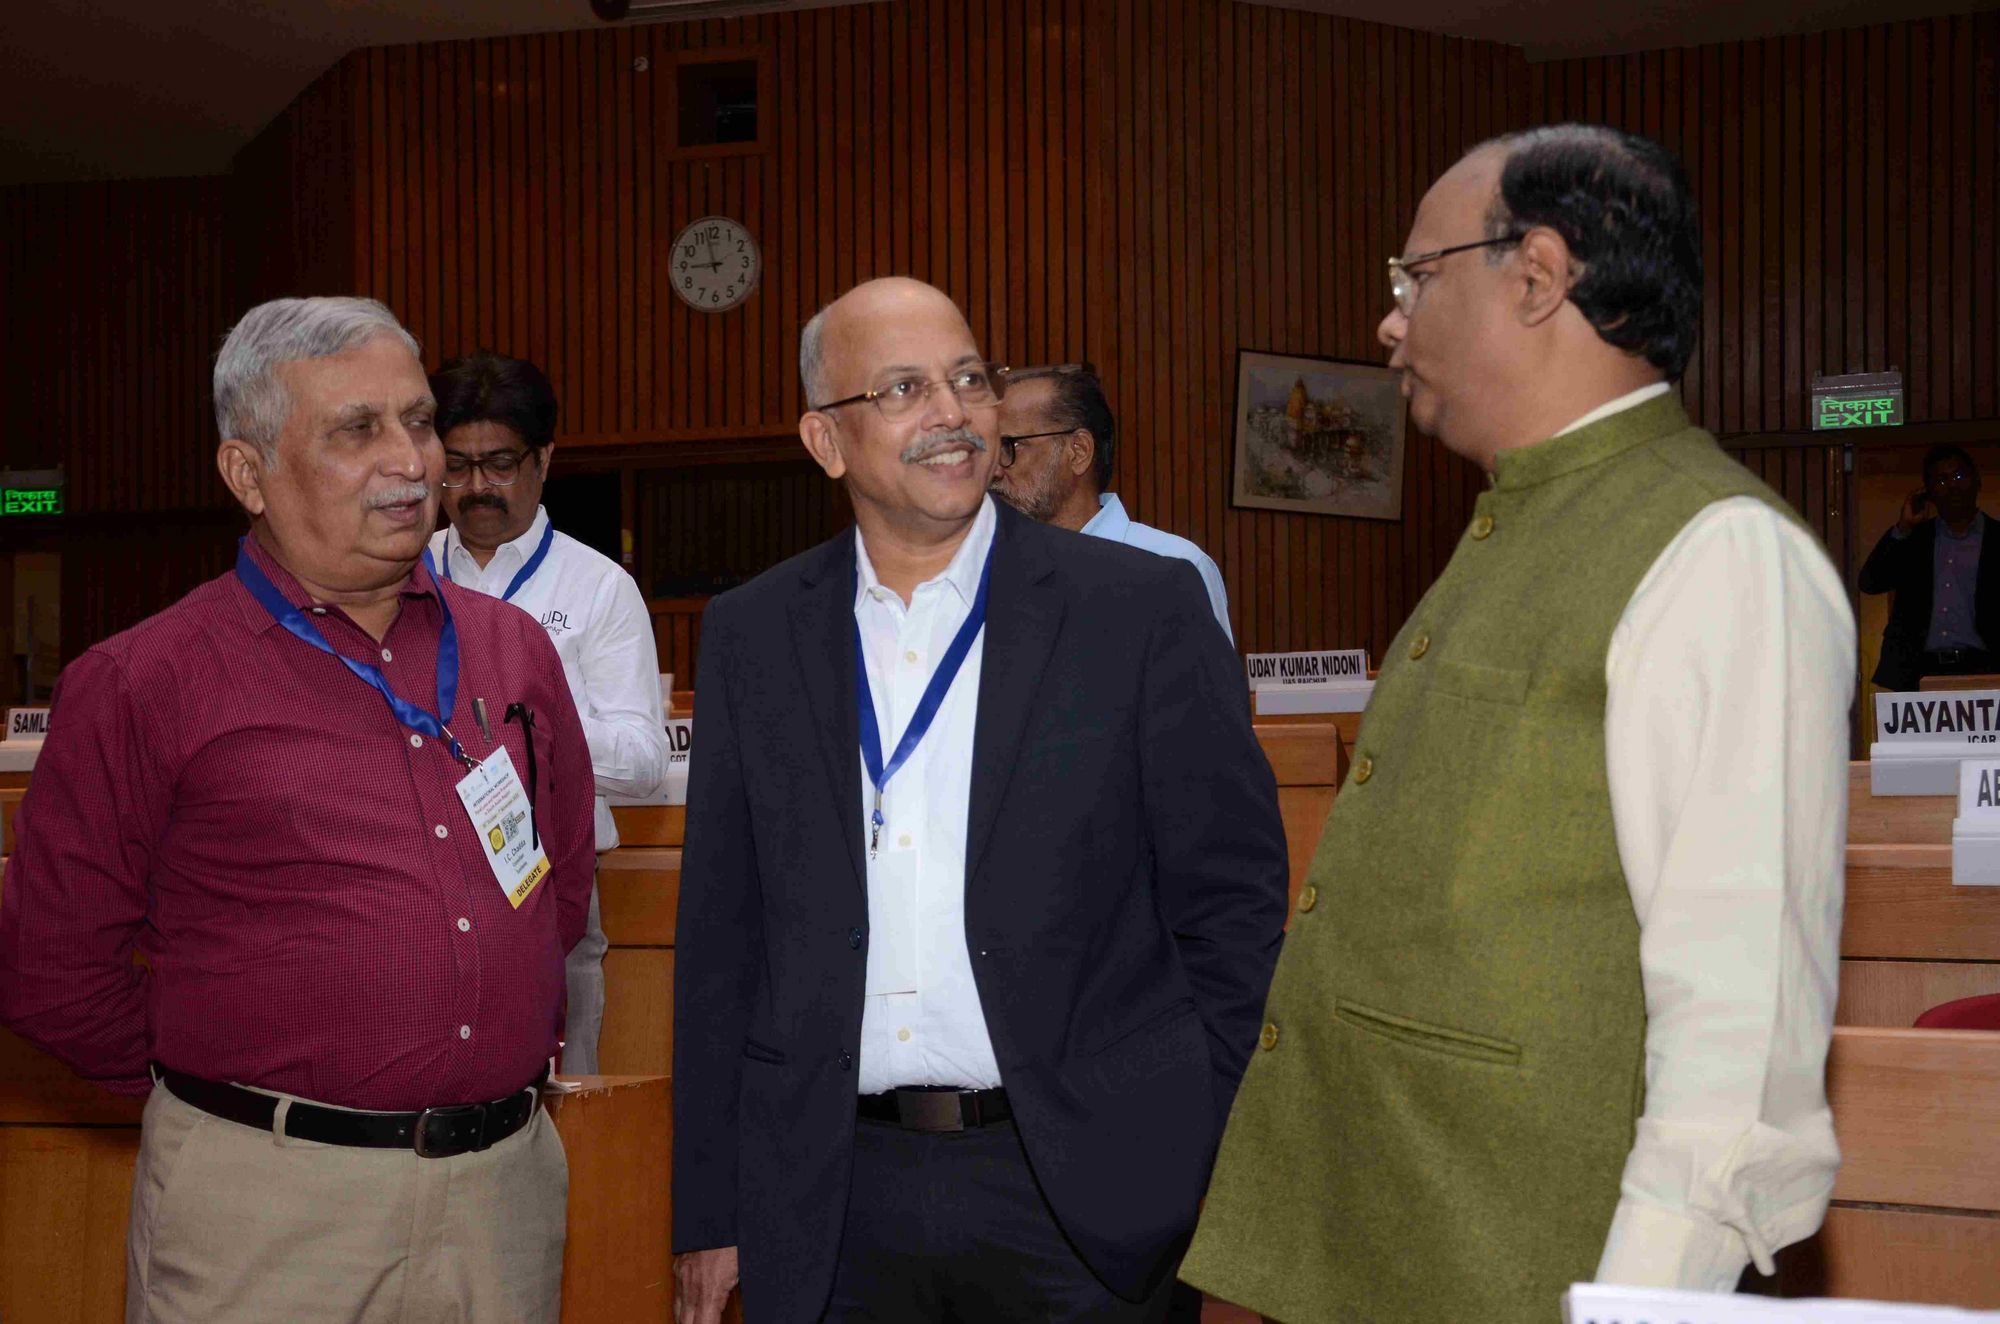 Mr IC Chadda, consultant, Mr Ujjwal Kumar, UPL Limited, and Dr Nachiket Kotwaliwale, Director Central Institute of Post-Harvest Engineering and Technology at ICAR, discussing during tea break.